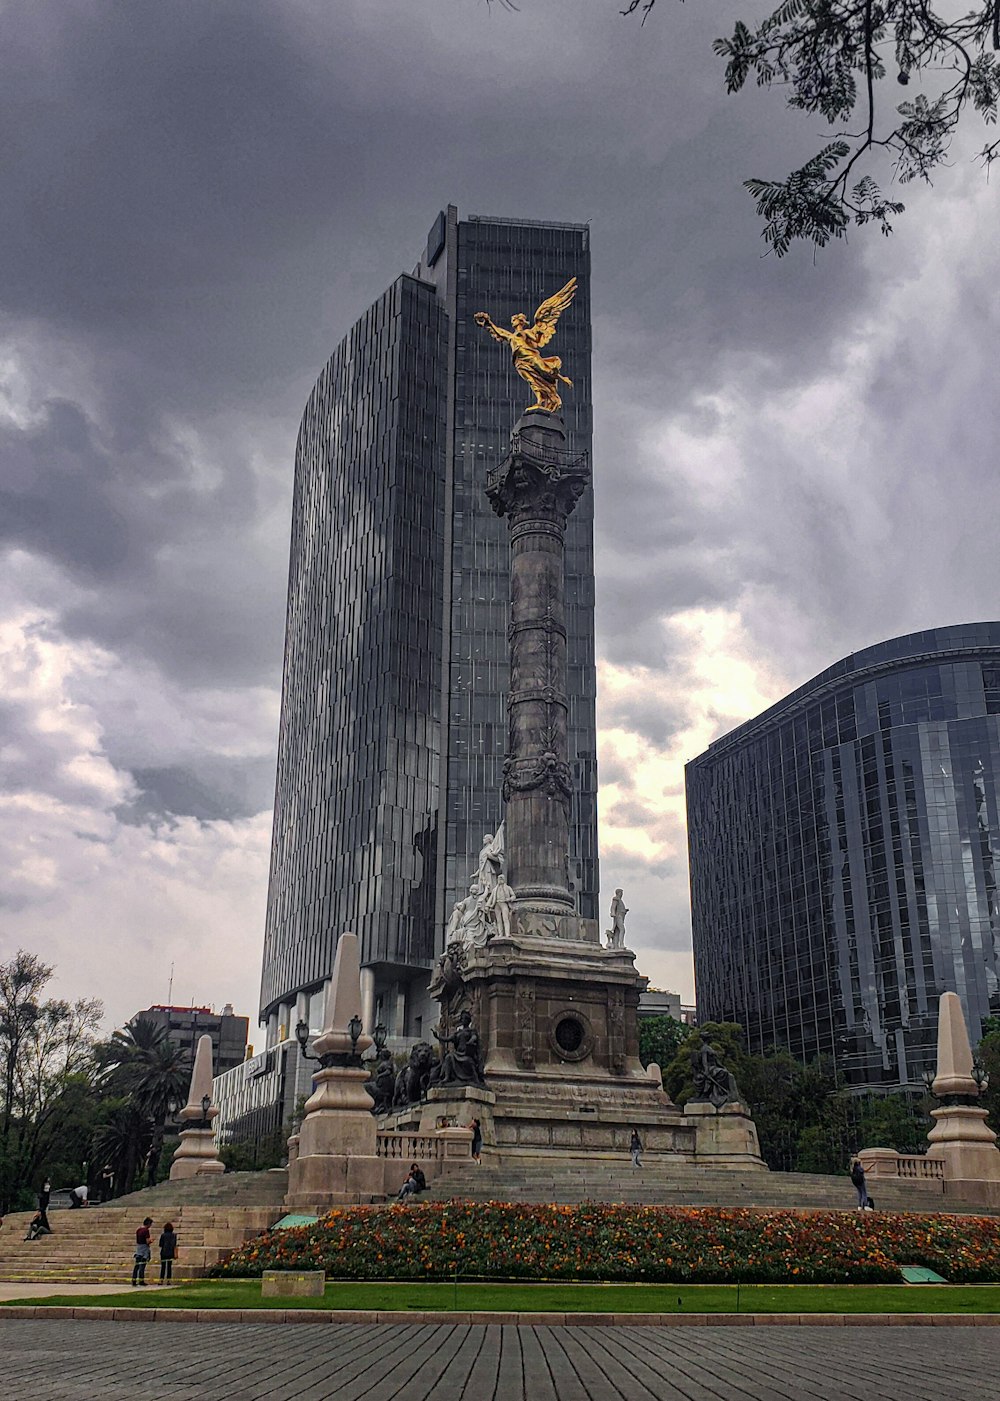 a statue in the middle of a park with tall buildings in the background